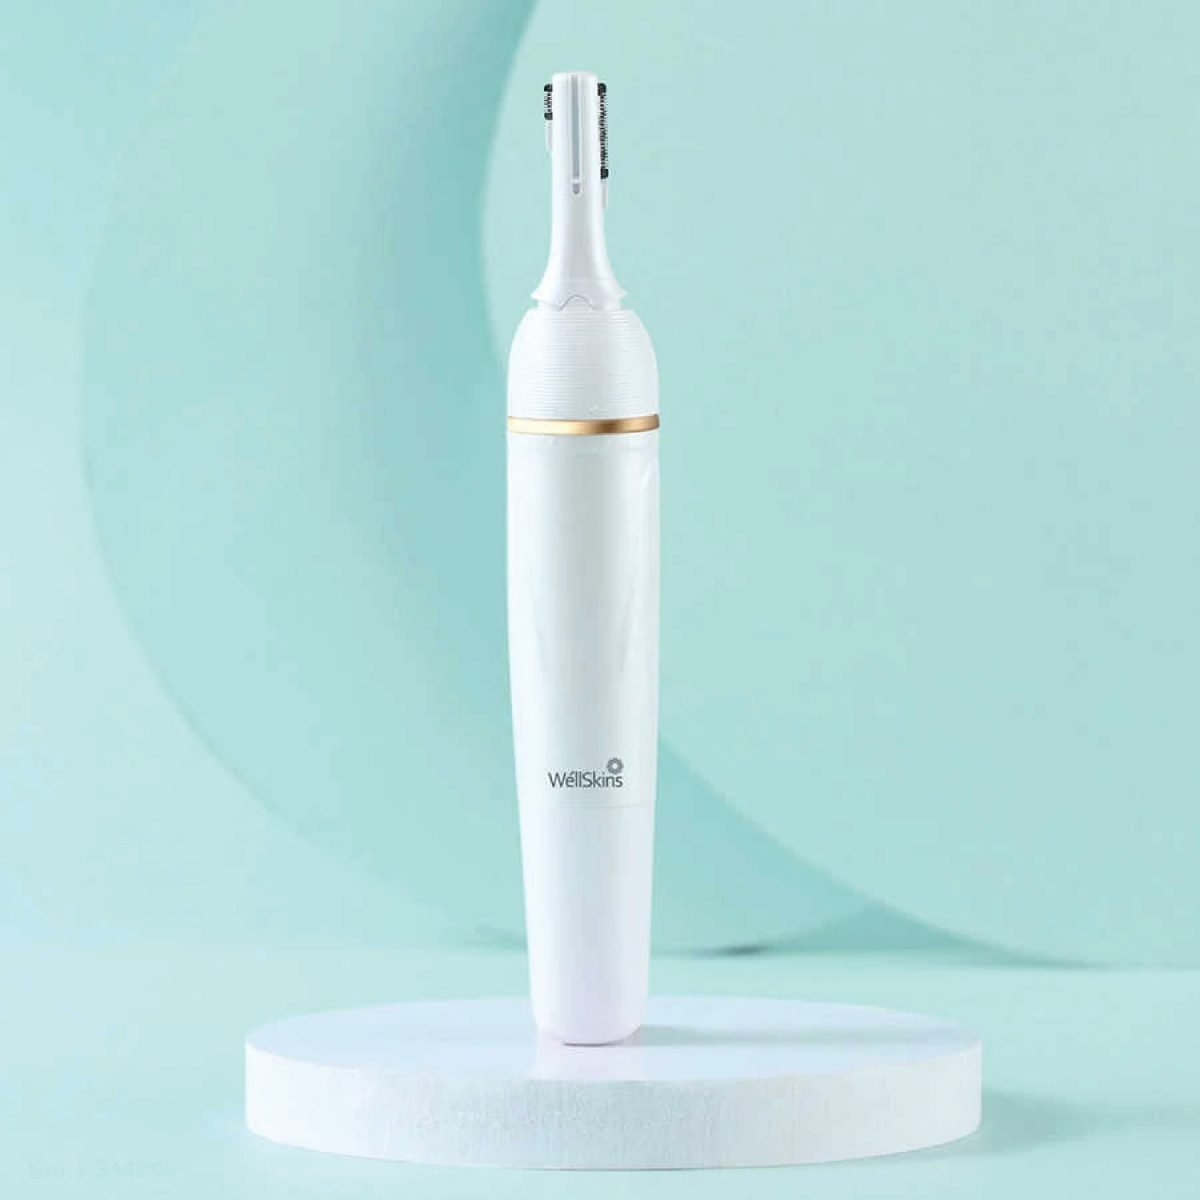 T3 01 Xiaomi Xiao Mi Youpin Wéllskins Electric Trimmer Repairer Shaver Body Hair Removal With Pivoting Head 30° Adjustable Cutter Head Hair Remover For Women Painless Lady Shaver 6-In-1 Https://Www.youtube.com/Watch?V=N-Wn12U3Uj4 Wéllskins Xiaomi Wellskins Wx-Tm01 Personal Beauty Trimmer